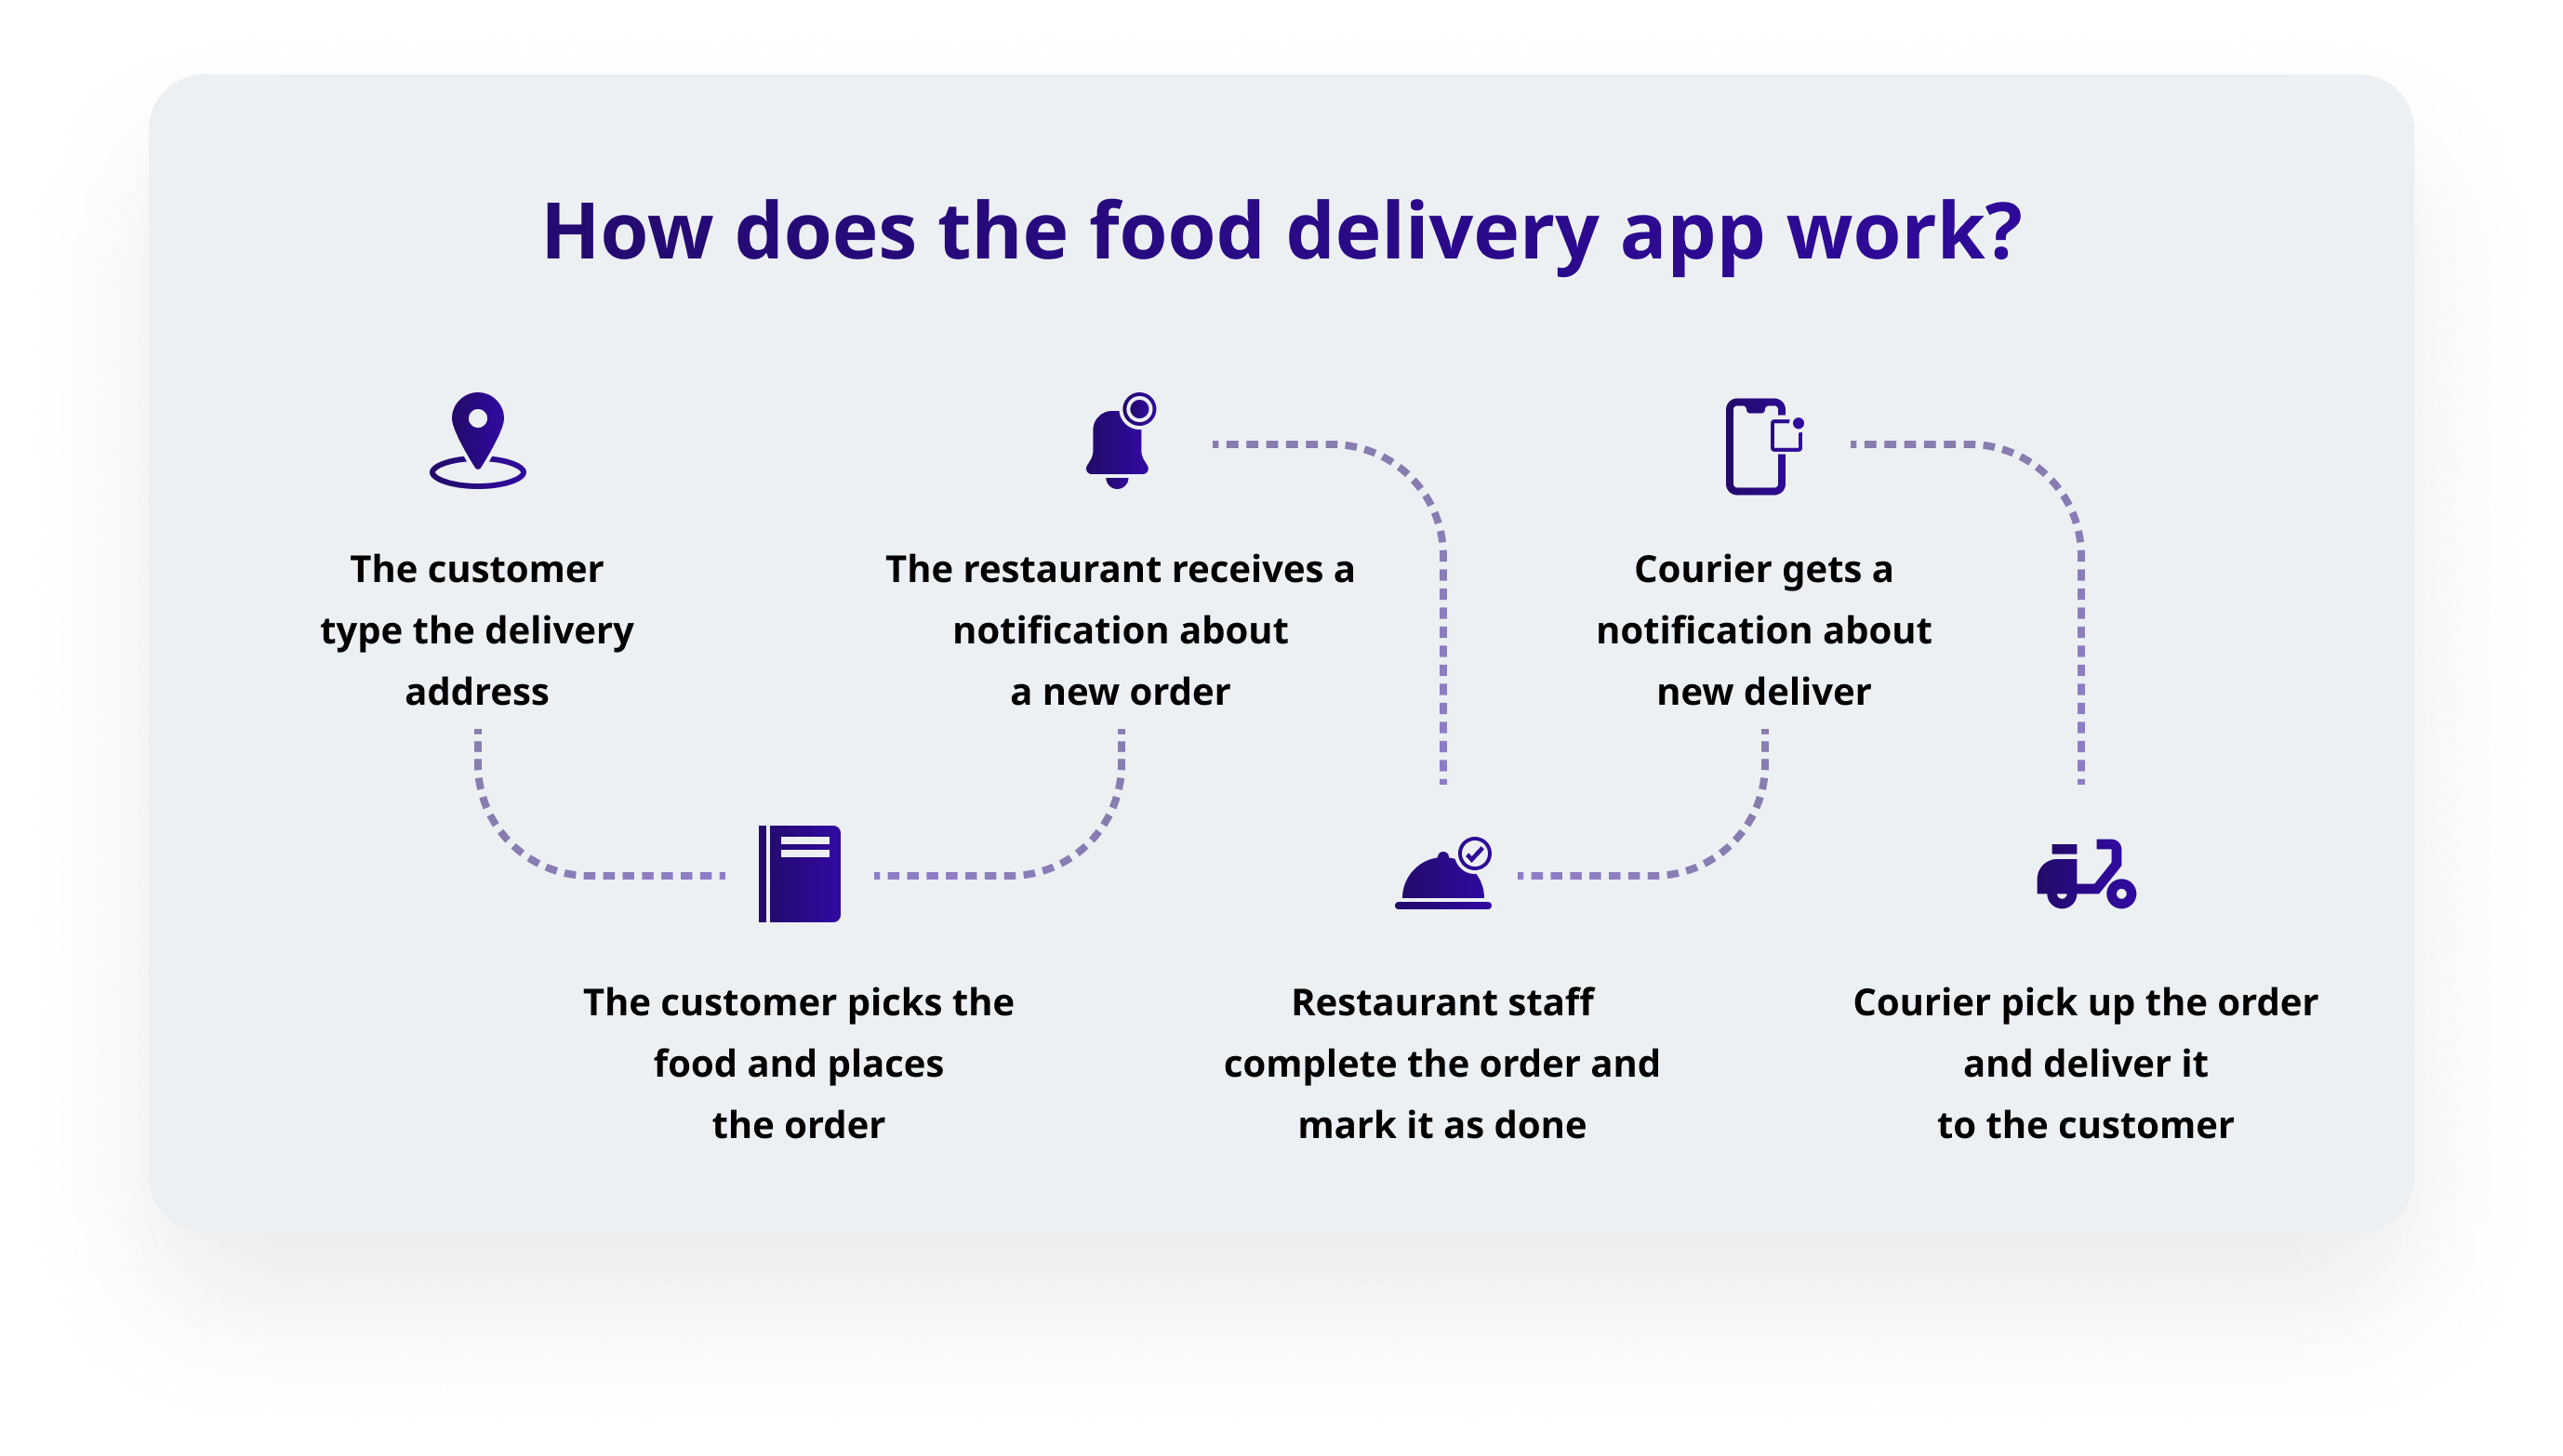 How does the food delivery app work?